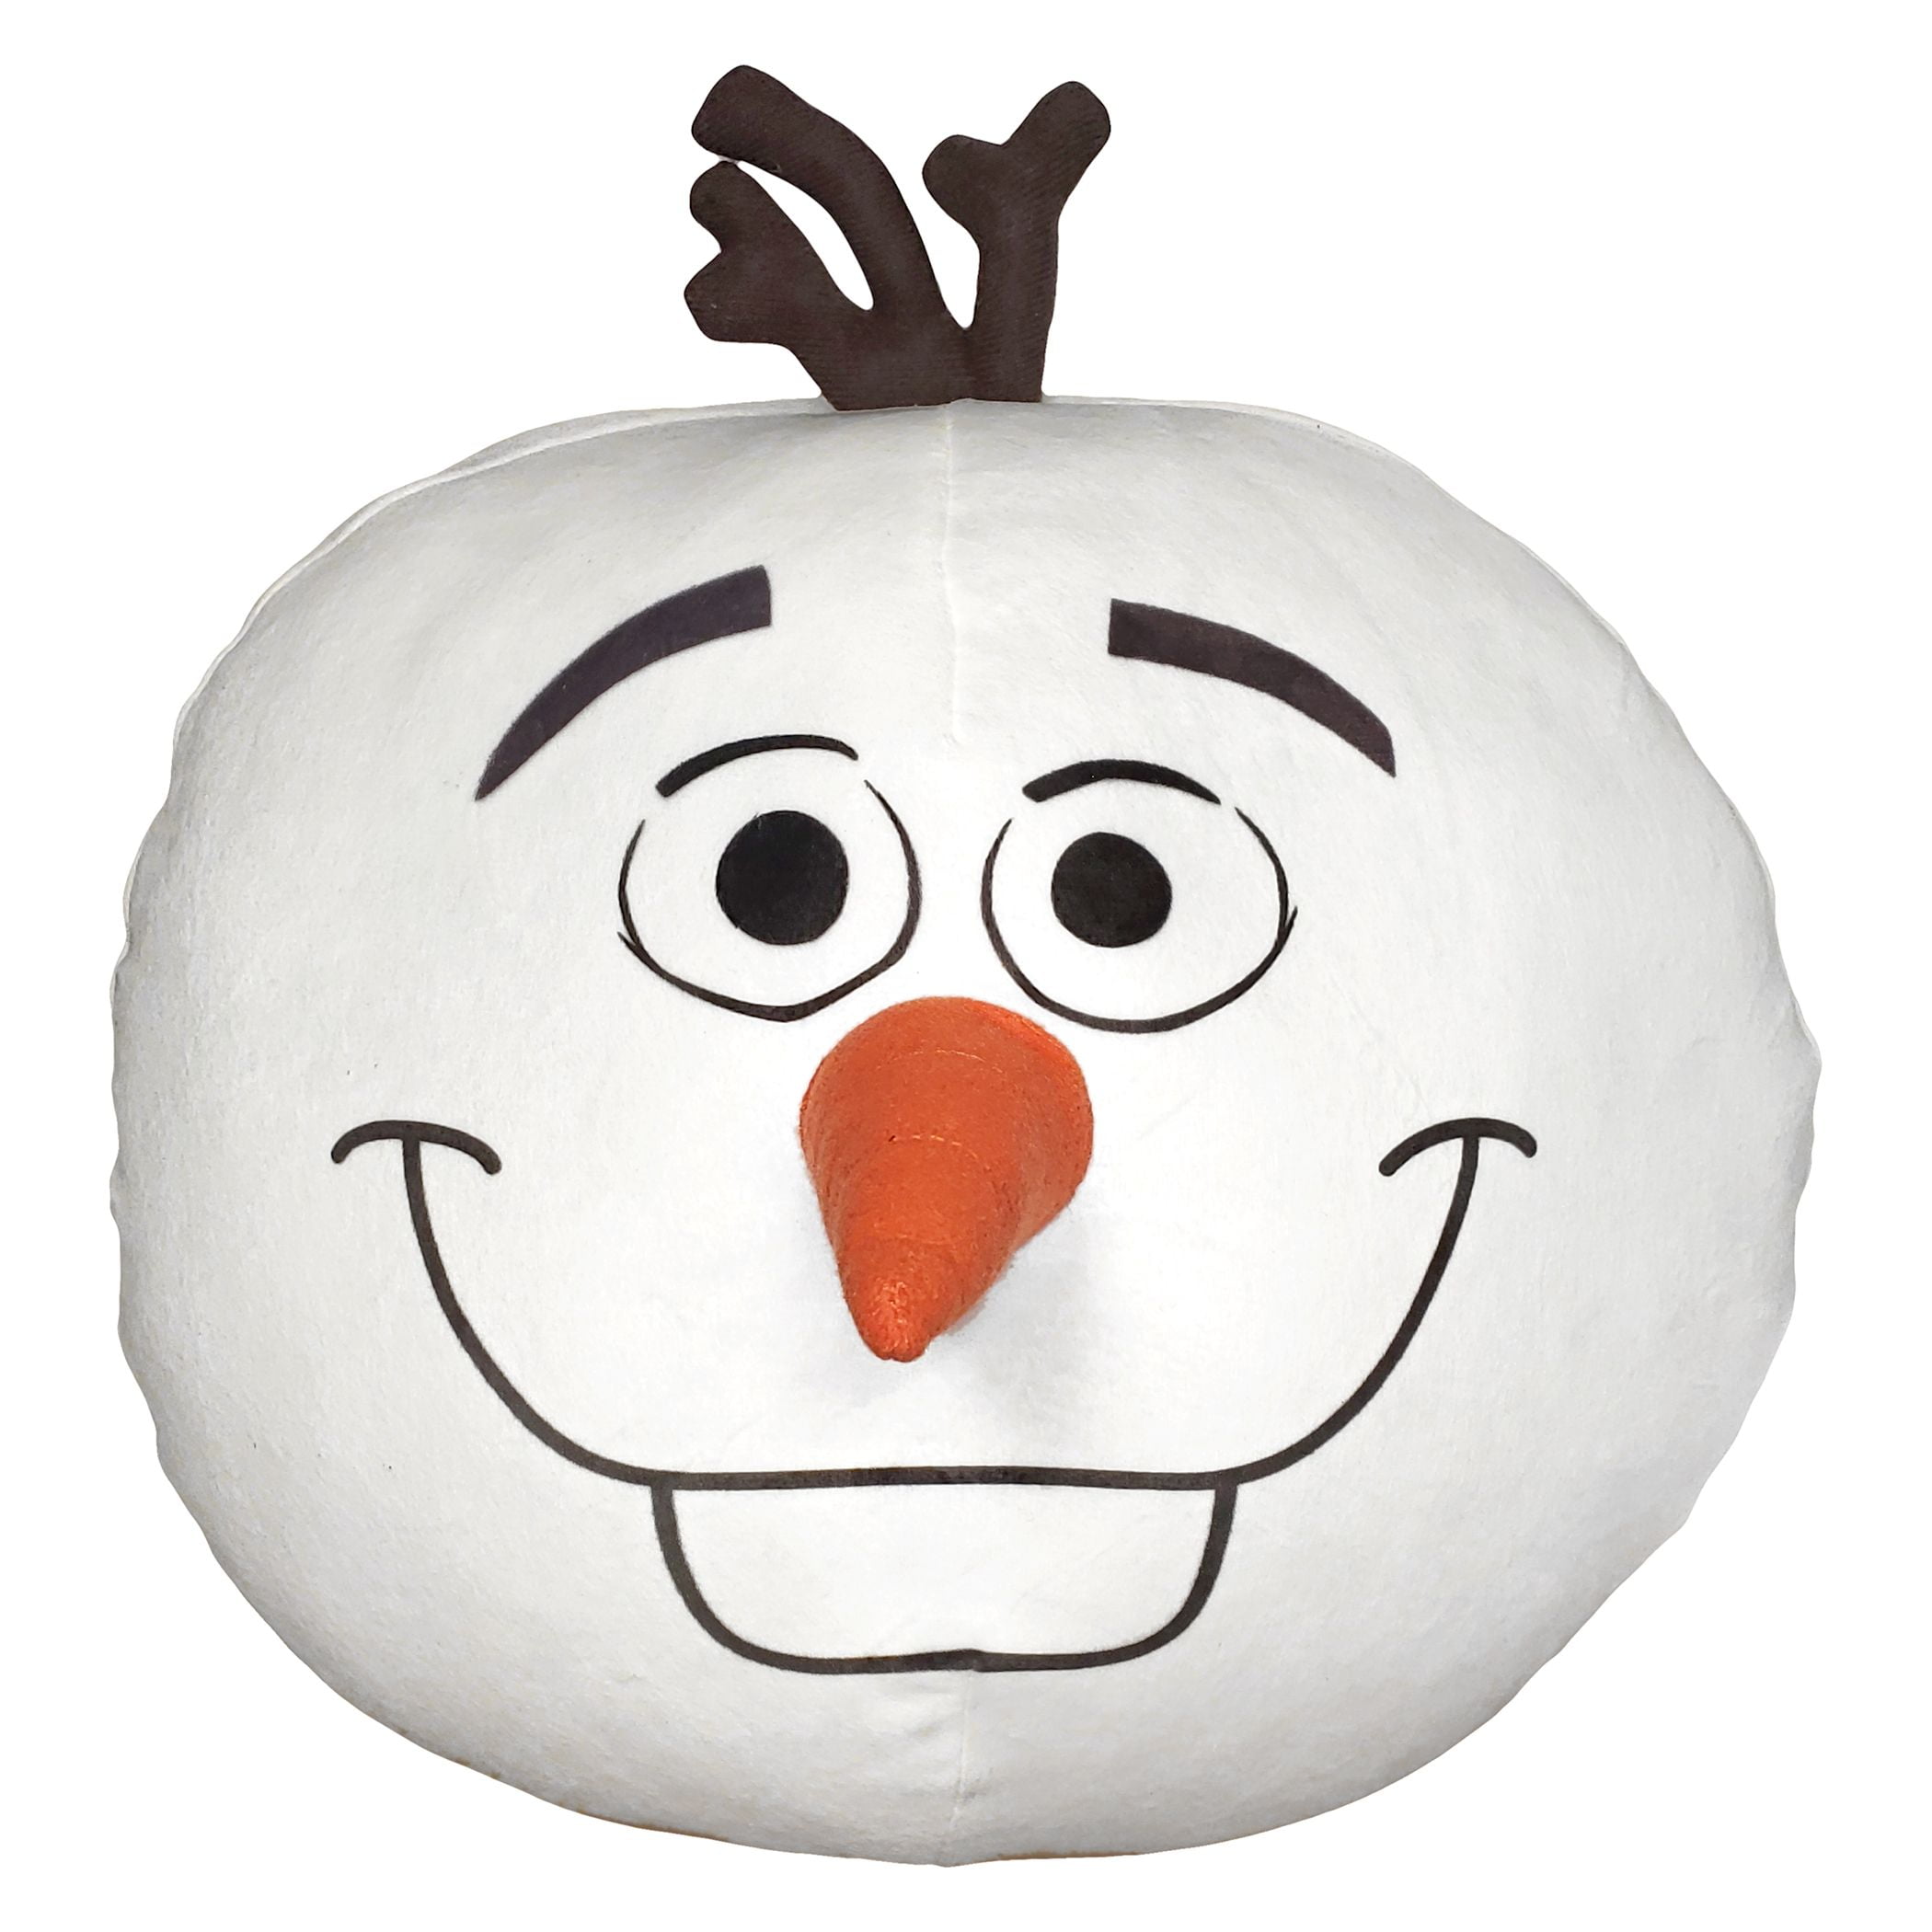 Disney Frozen Olaf Cuddle Pillow 2nd Day Delivery for sale online 